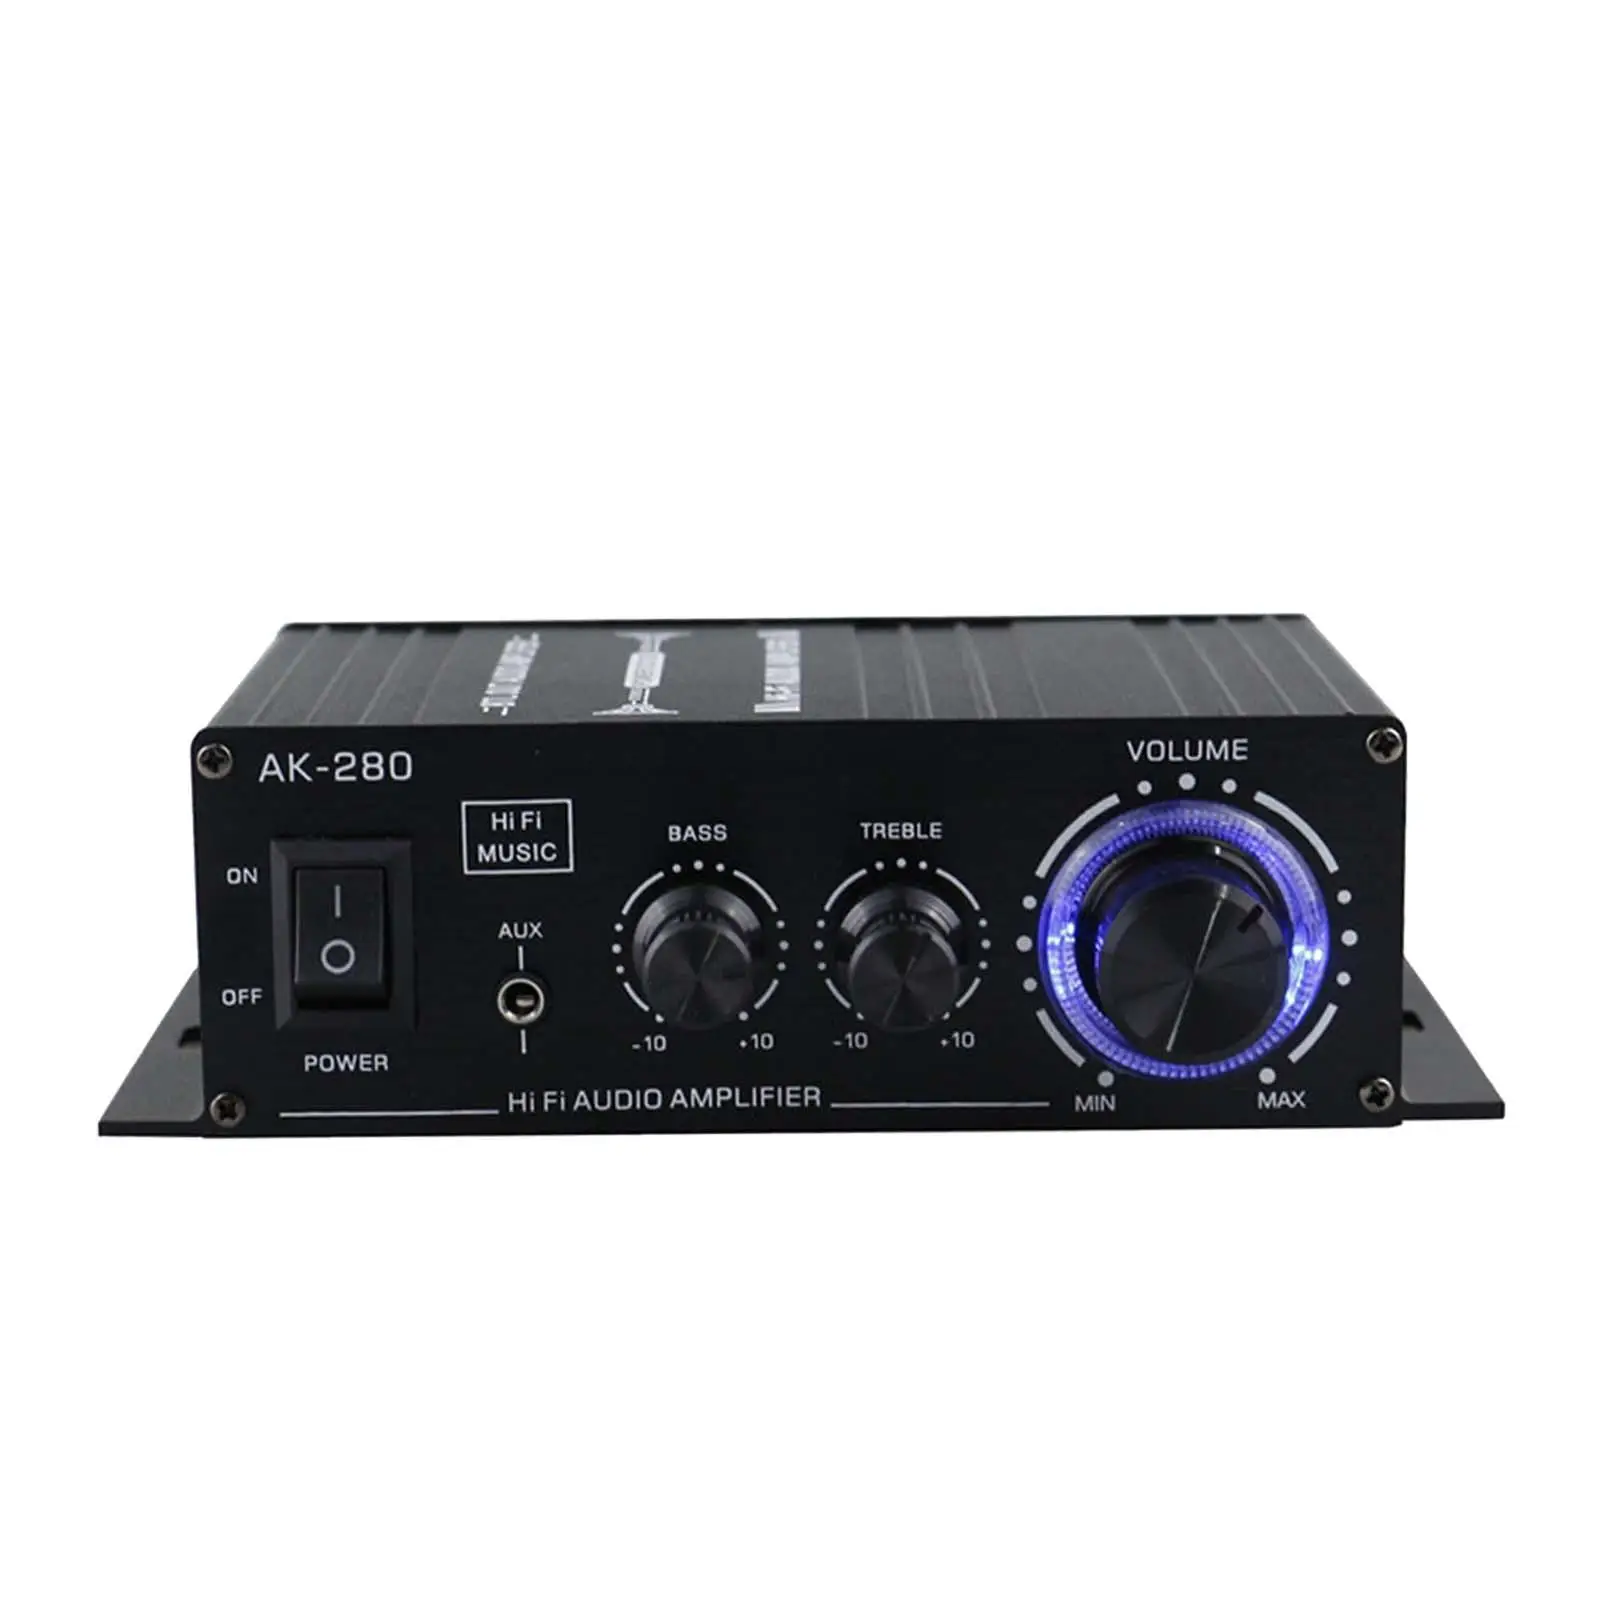 AK-280 Stereo Audio Power Amplifier Dual Channel Bass Treble Volume Adjustment 12V Stereo Receivers for Home Stereo Speakers